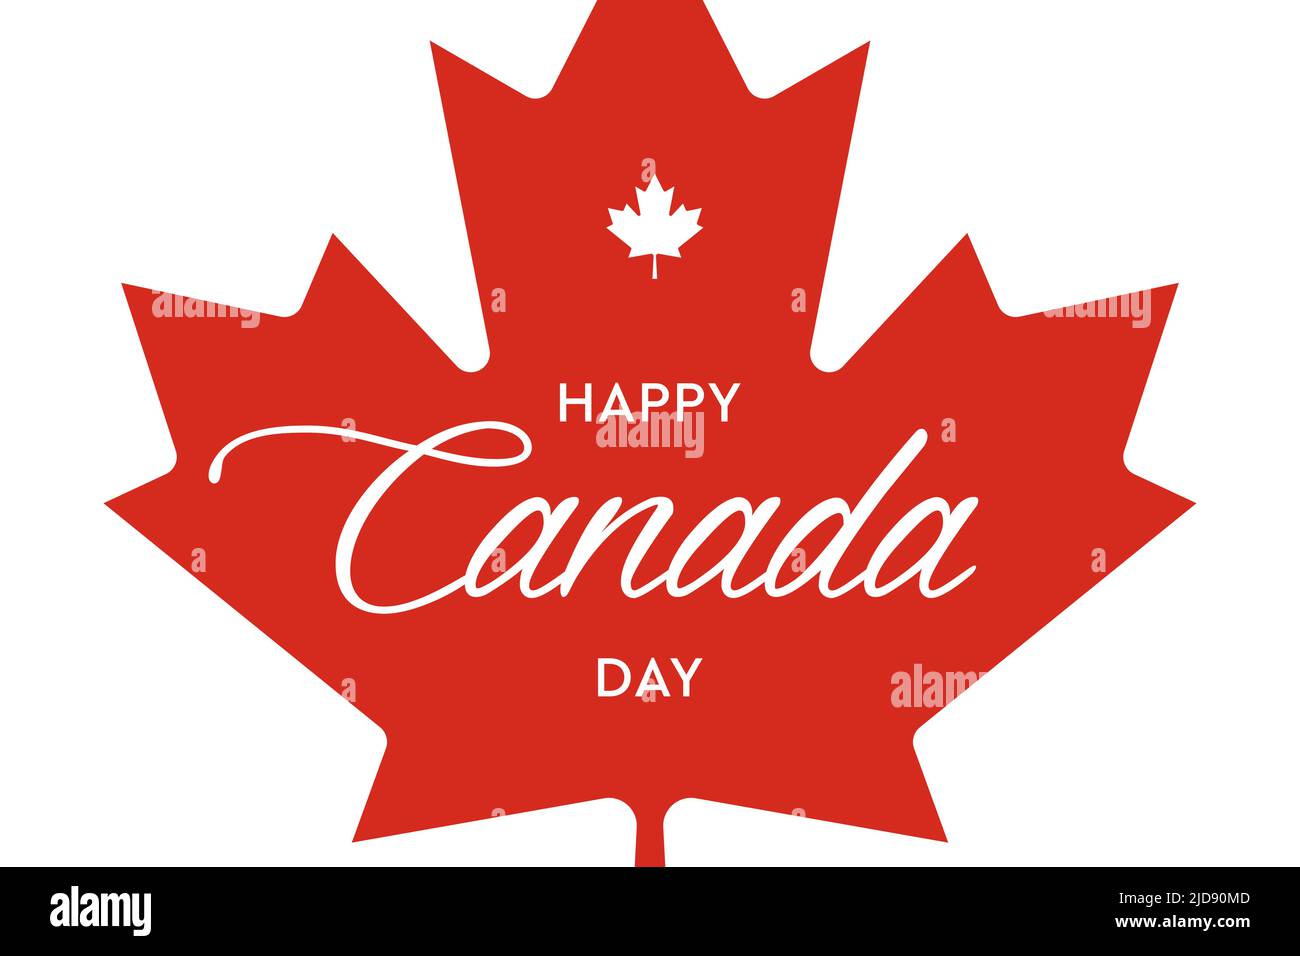 Canada day 1st July. Happy Canada Day modern cover, banner, card or poster, design concept with text and canadian flag maple leaf on a red background. Stock Photo